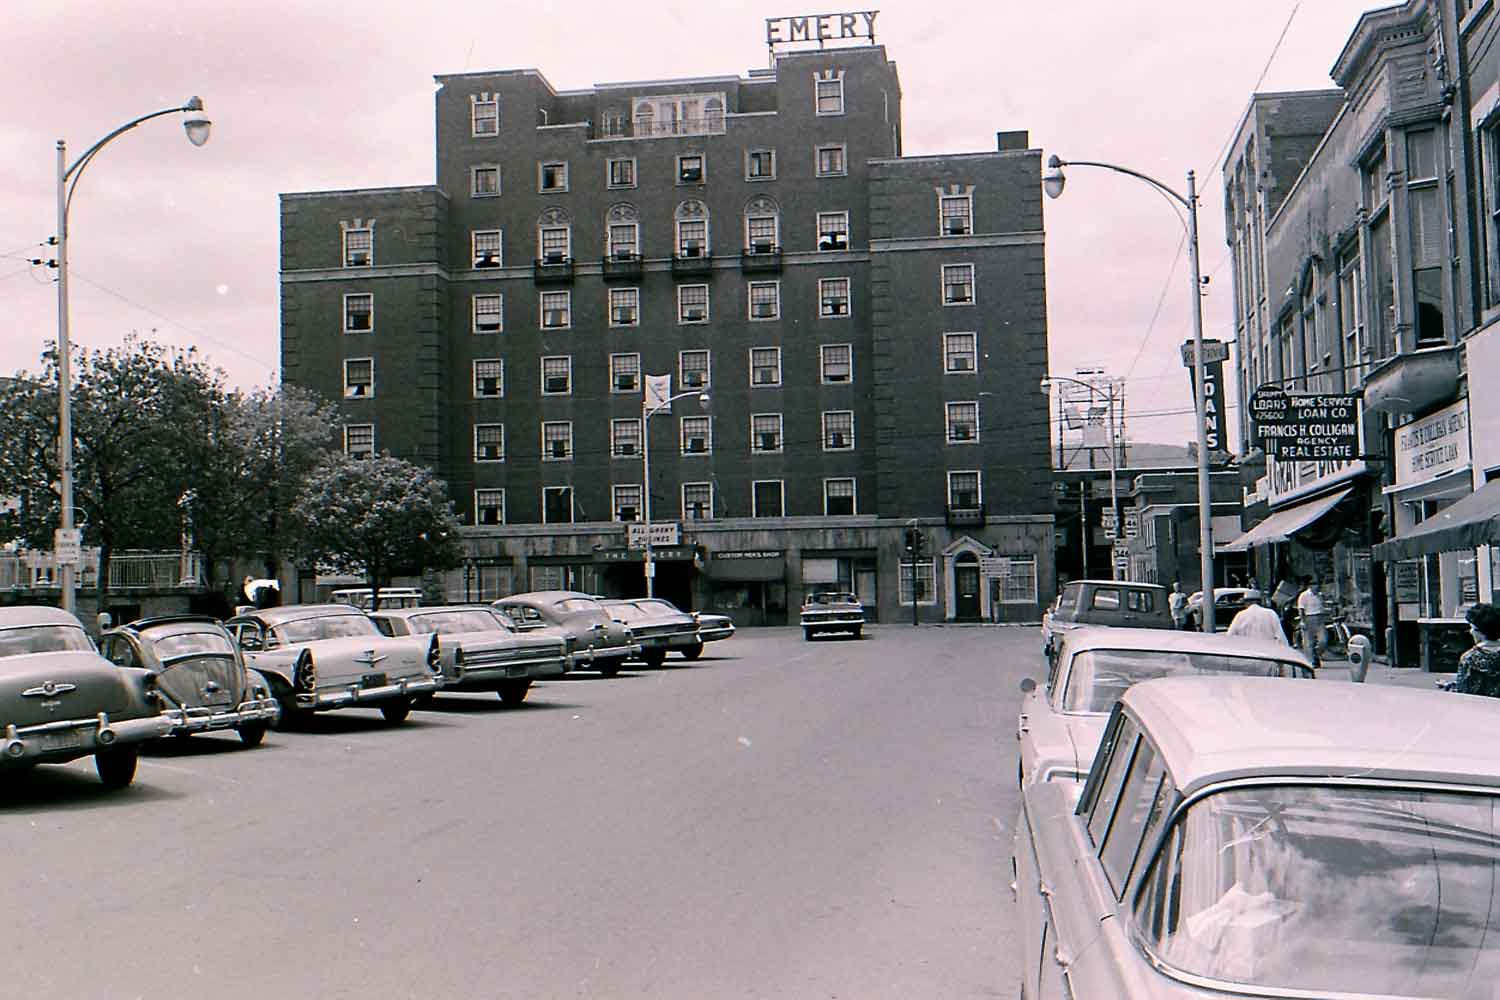 Street view of Emery Hotel